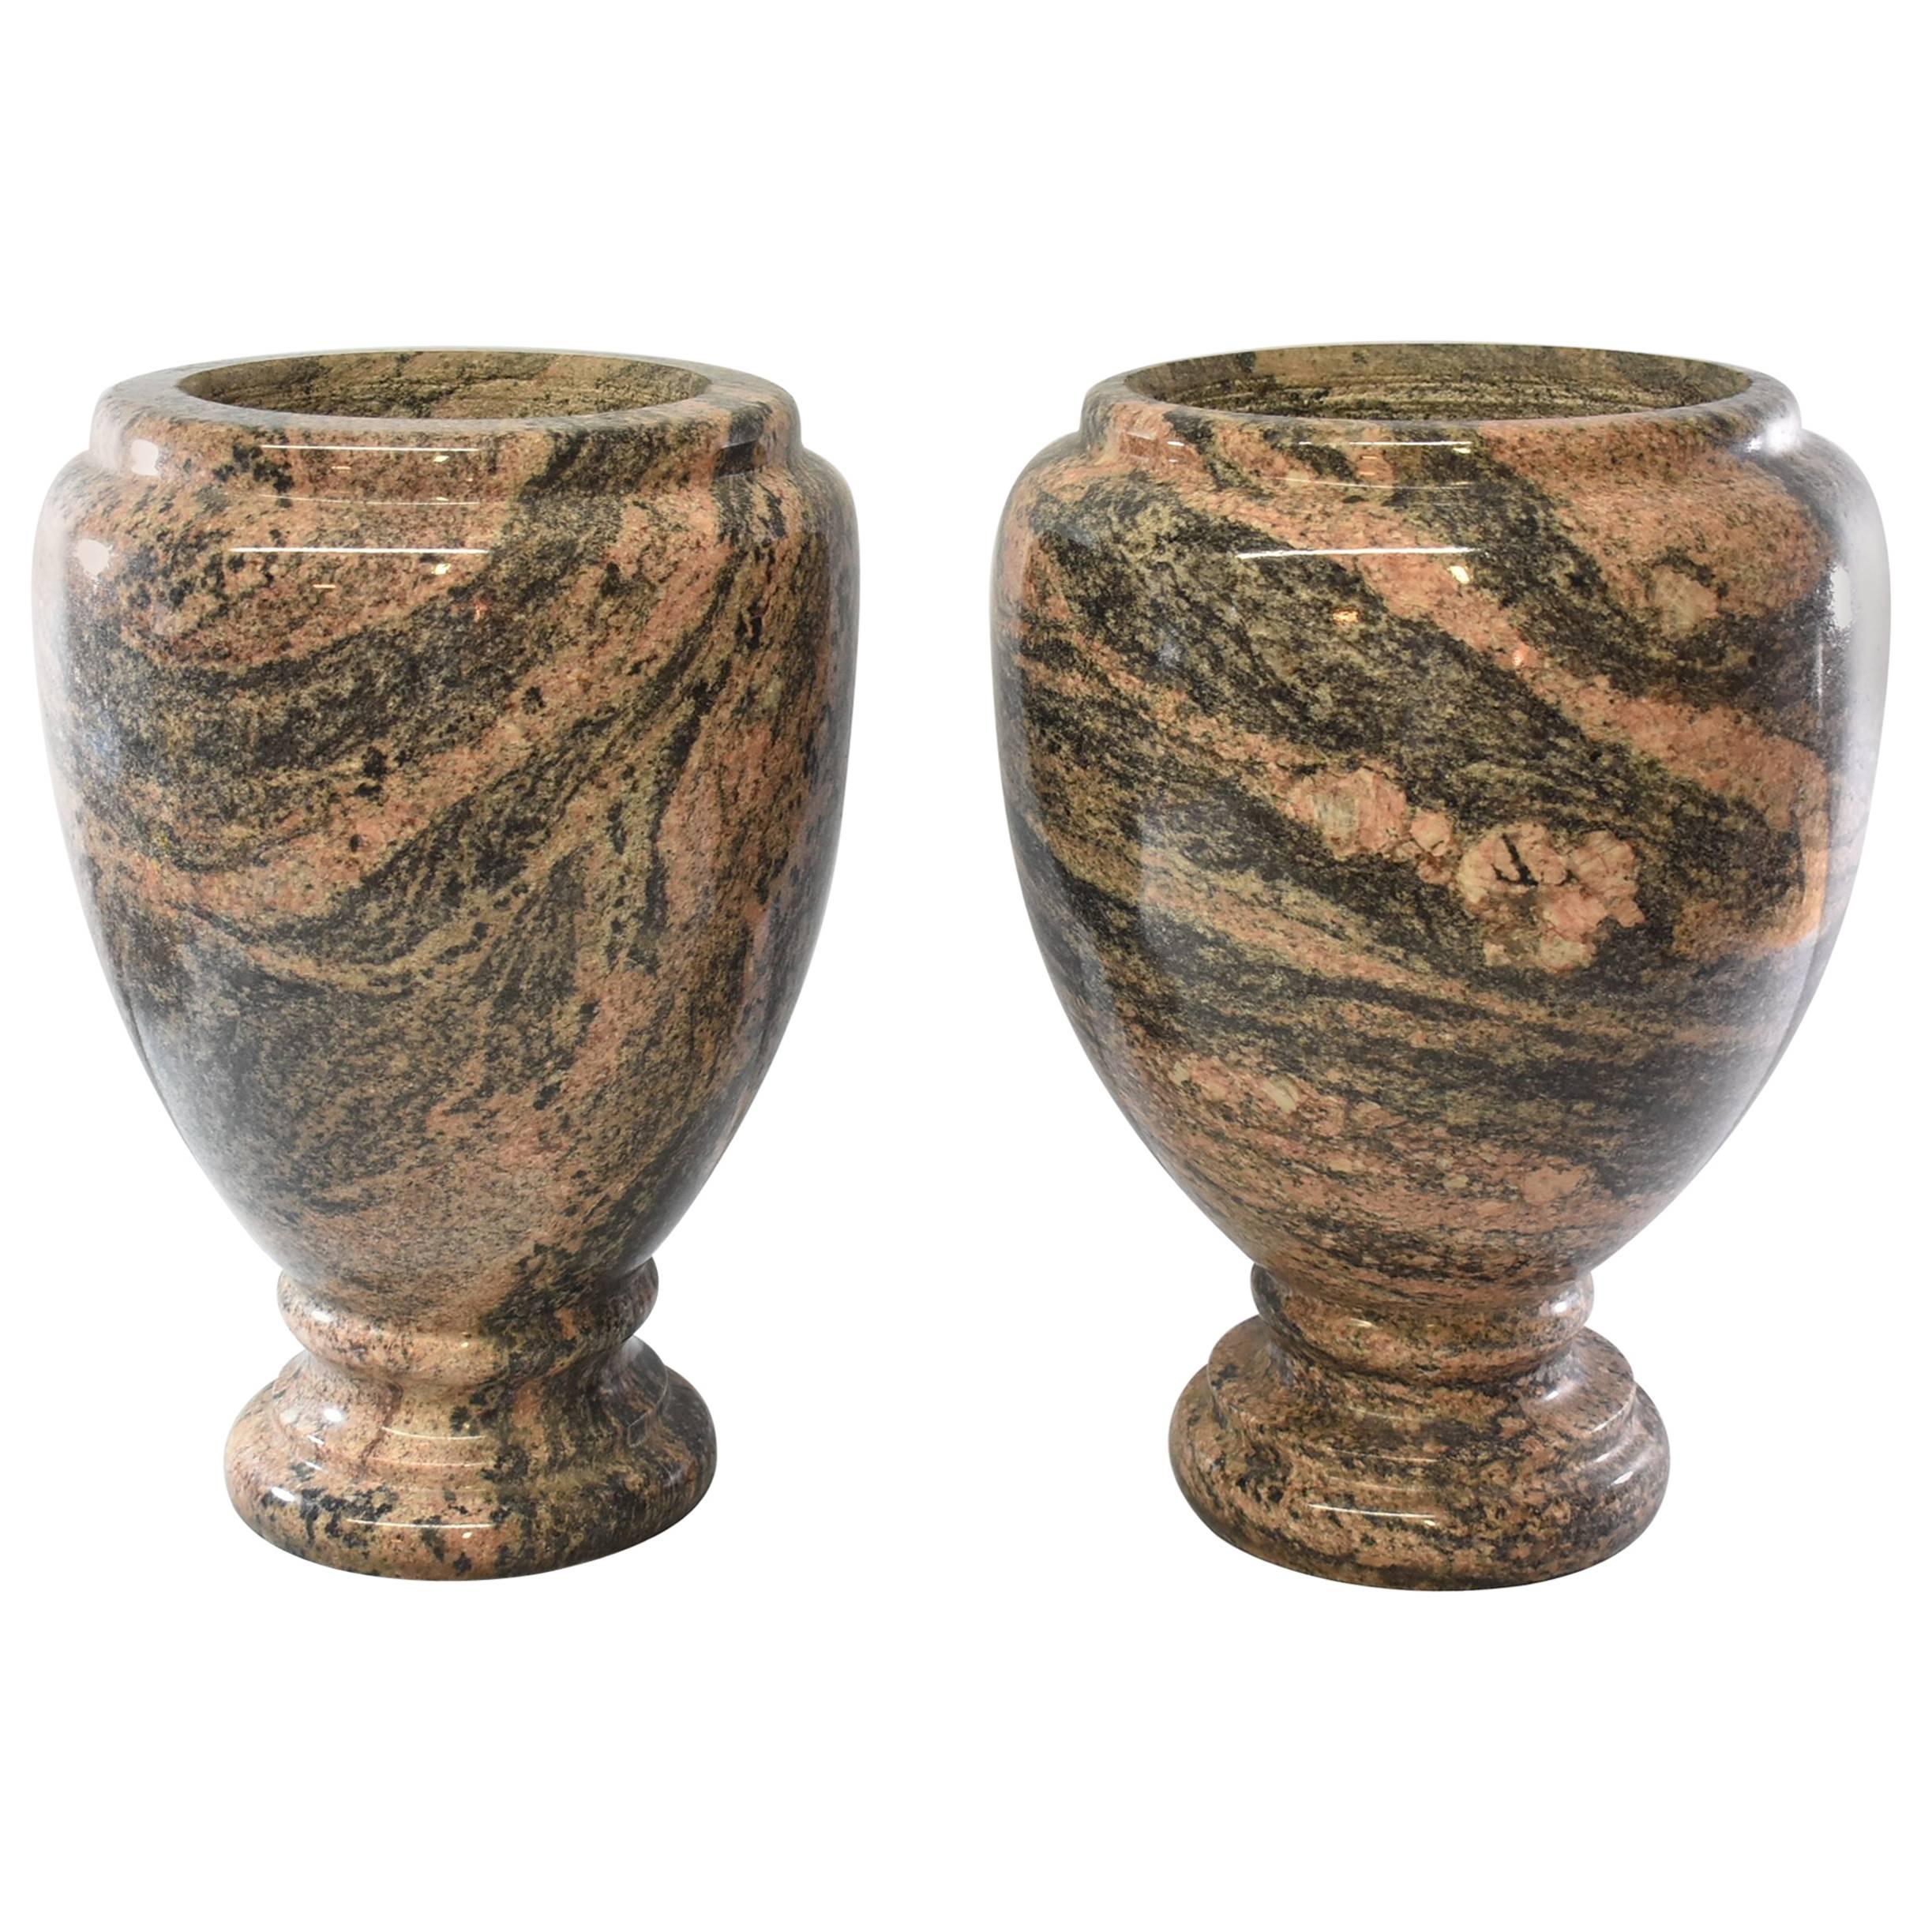 20th Century Turned and Polished Set of Two 16" Tall Granite Urns / Planters For Sale